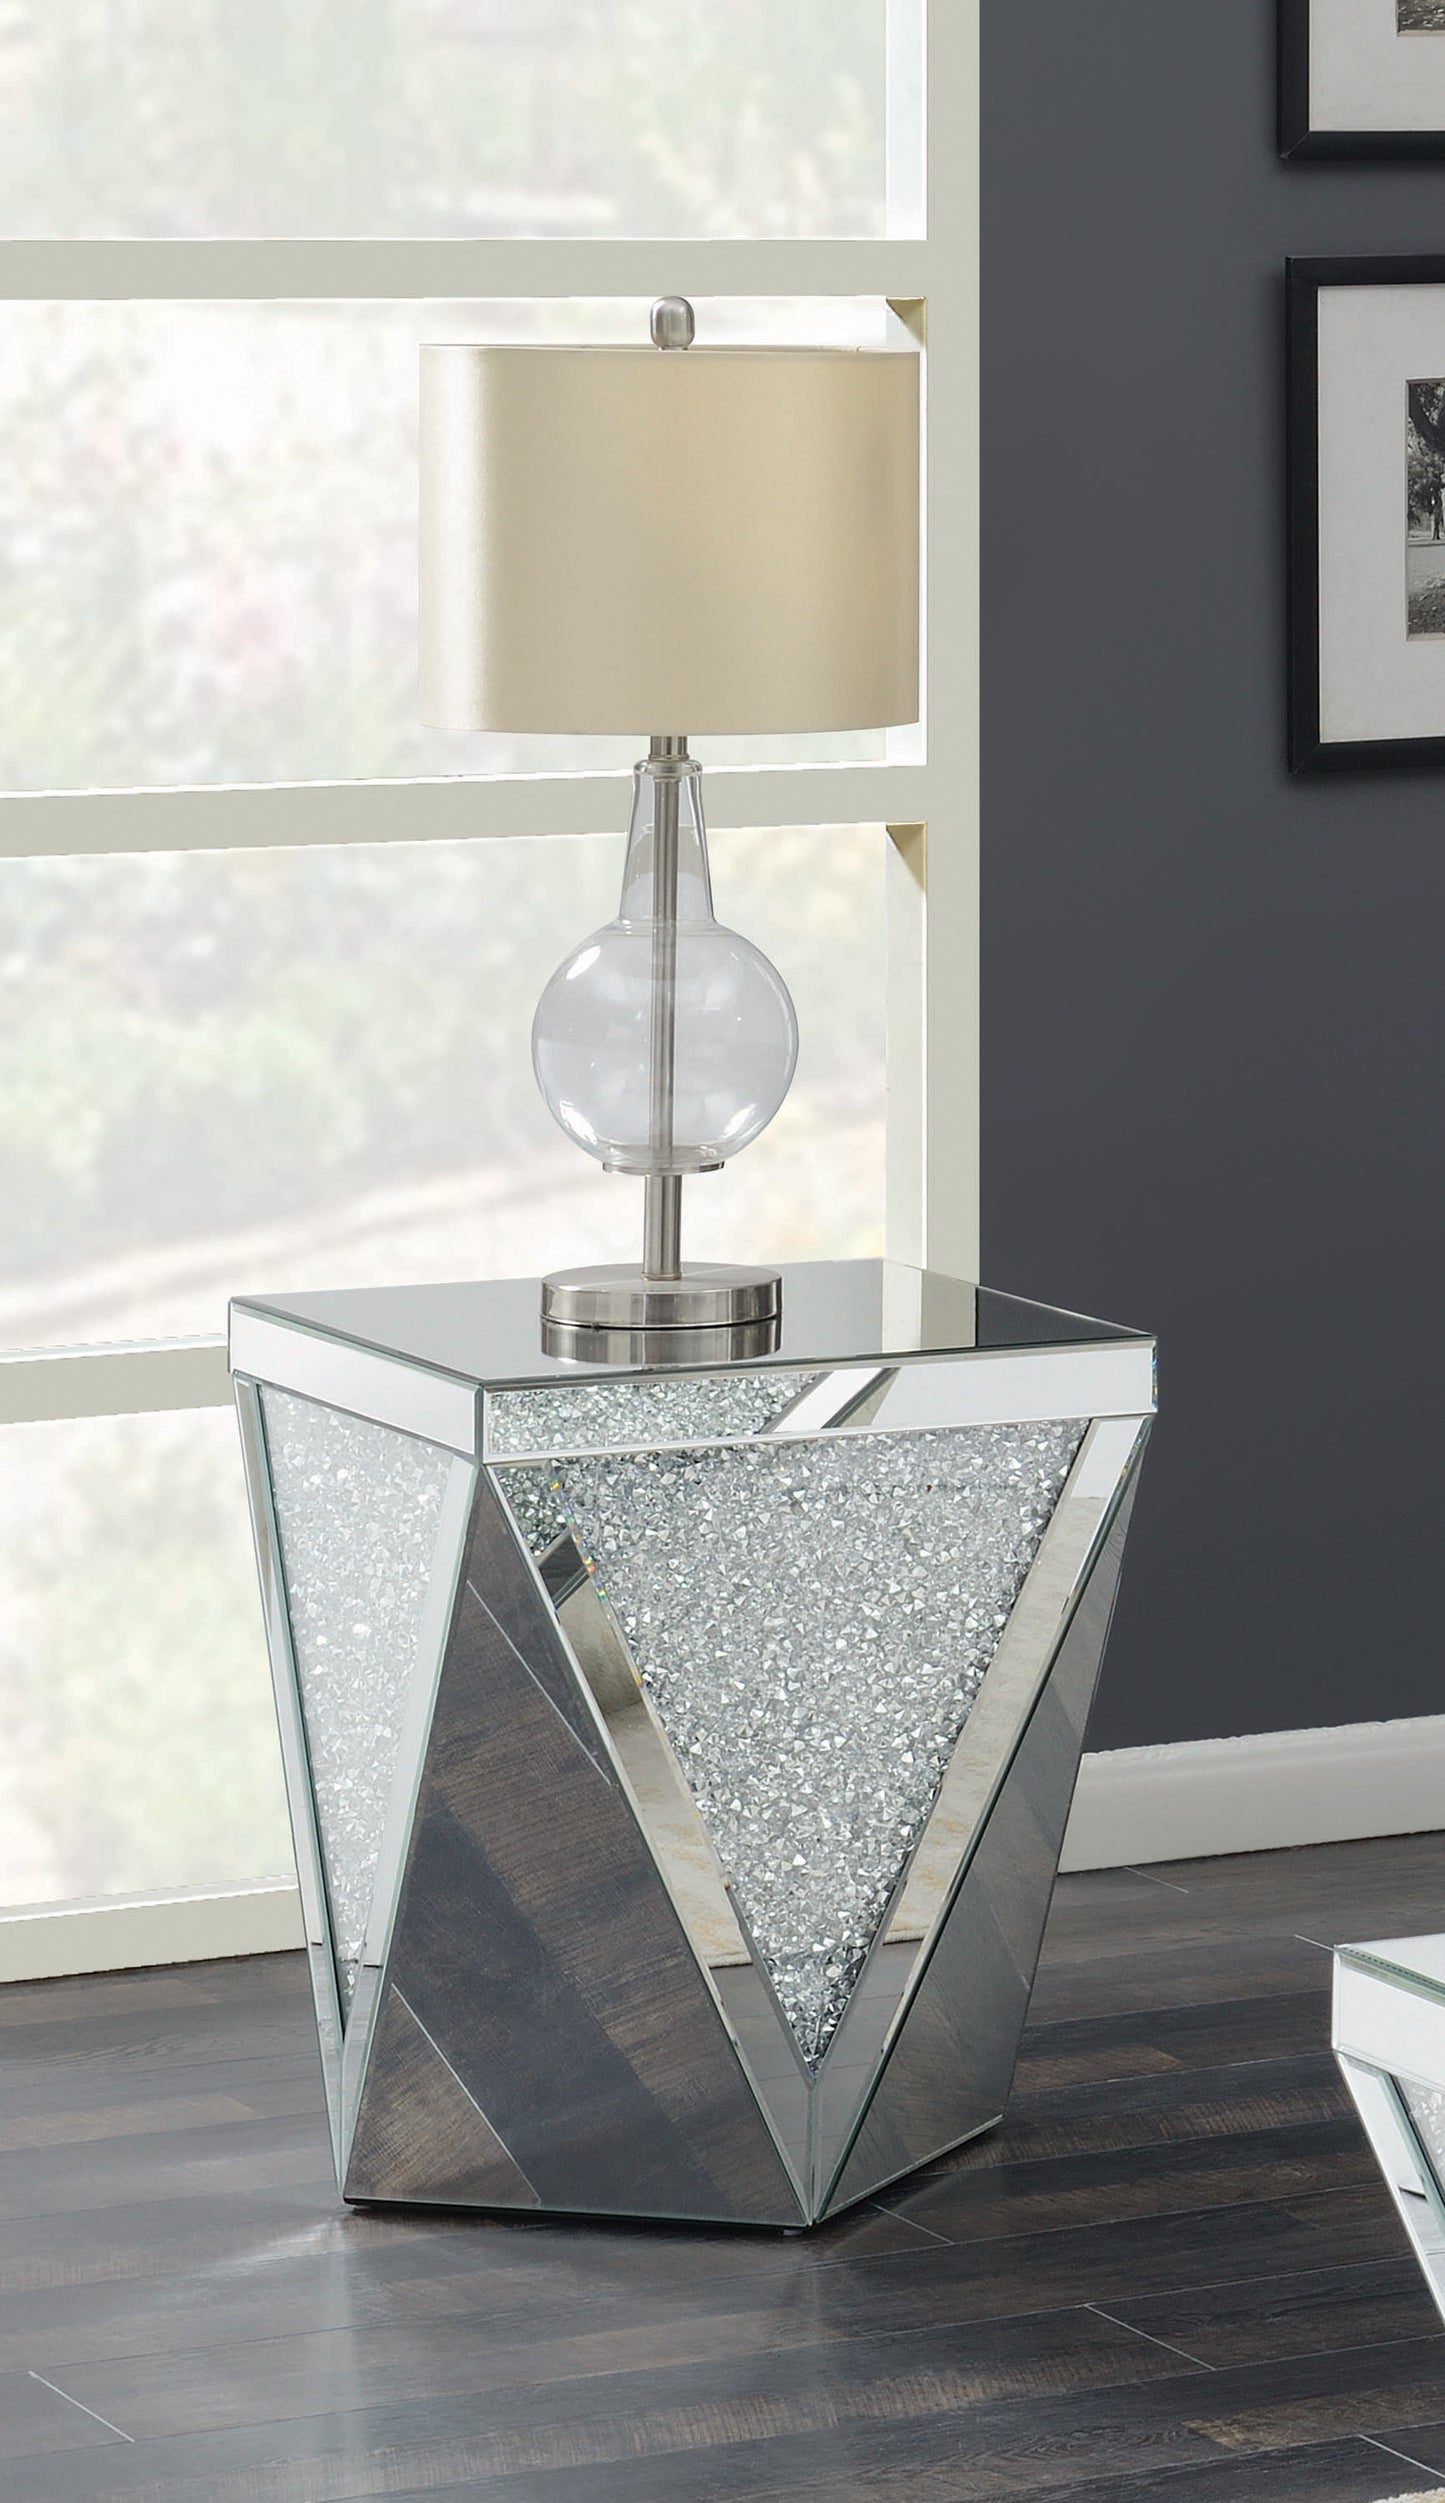 Square End Table with Triangle Detailing Silver and Clear Mirror